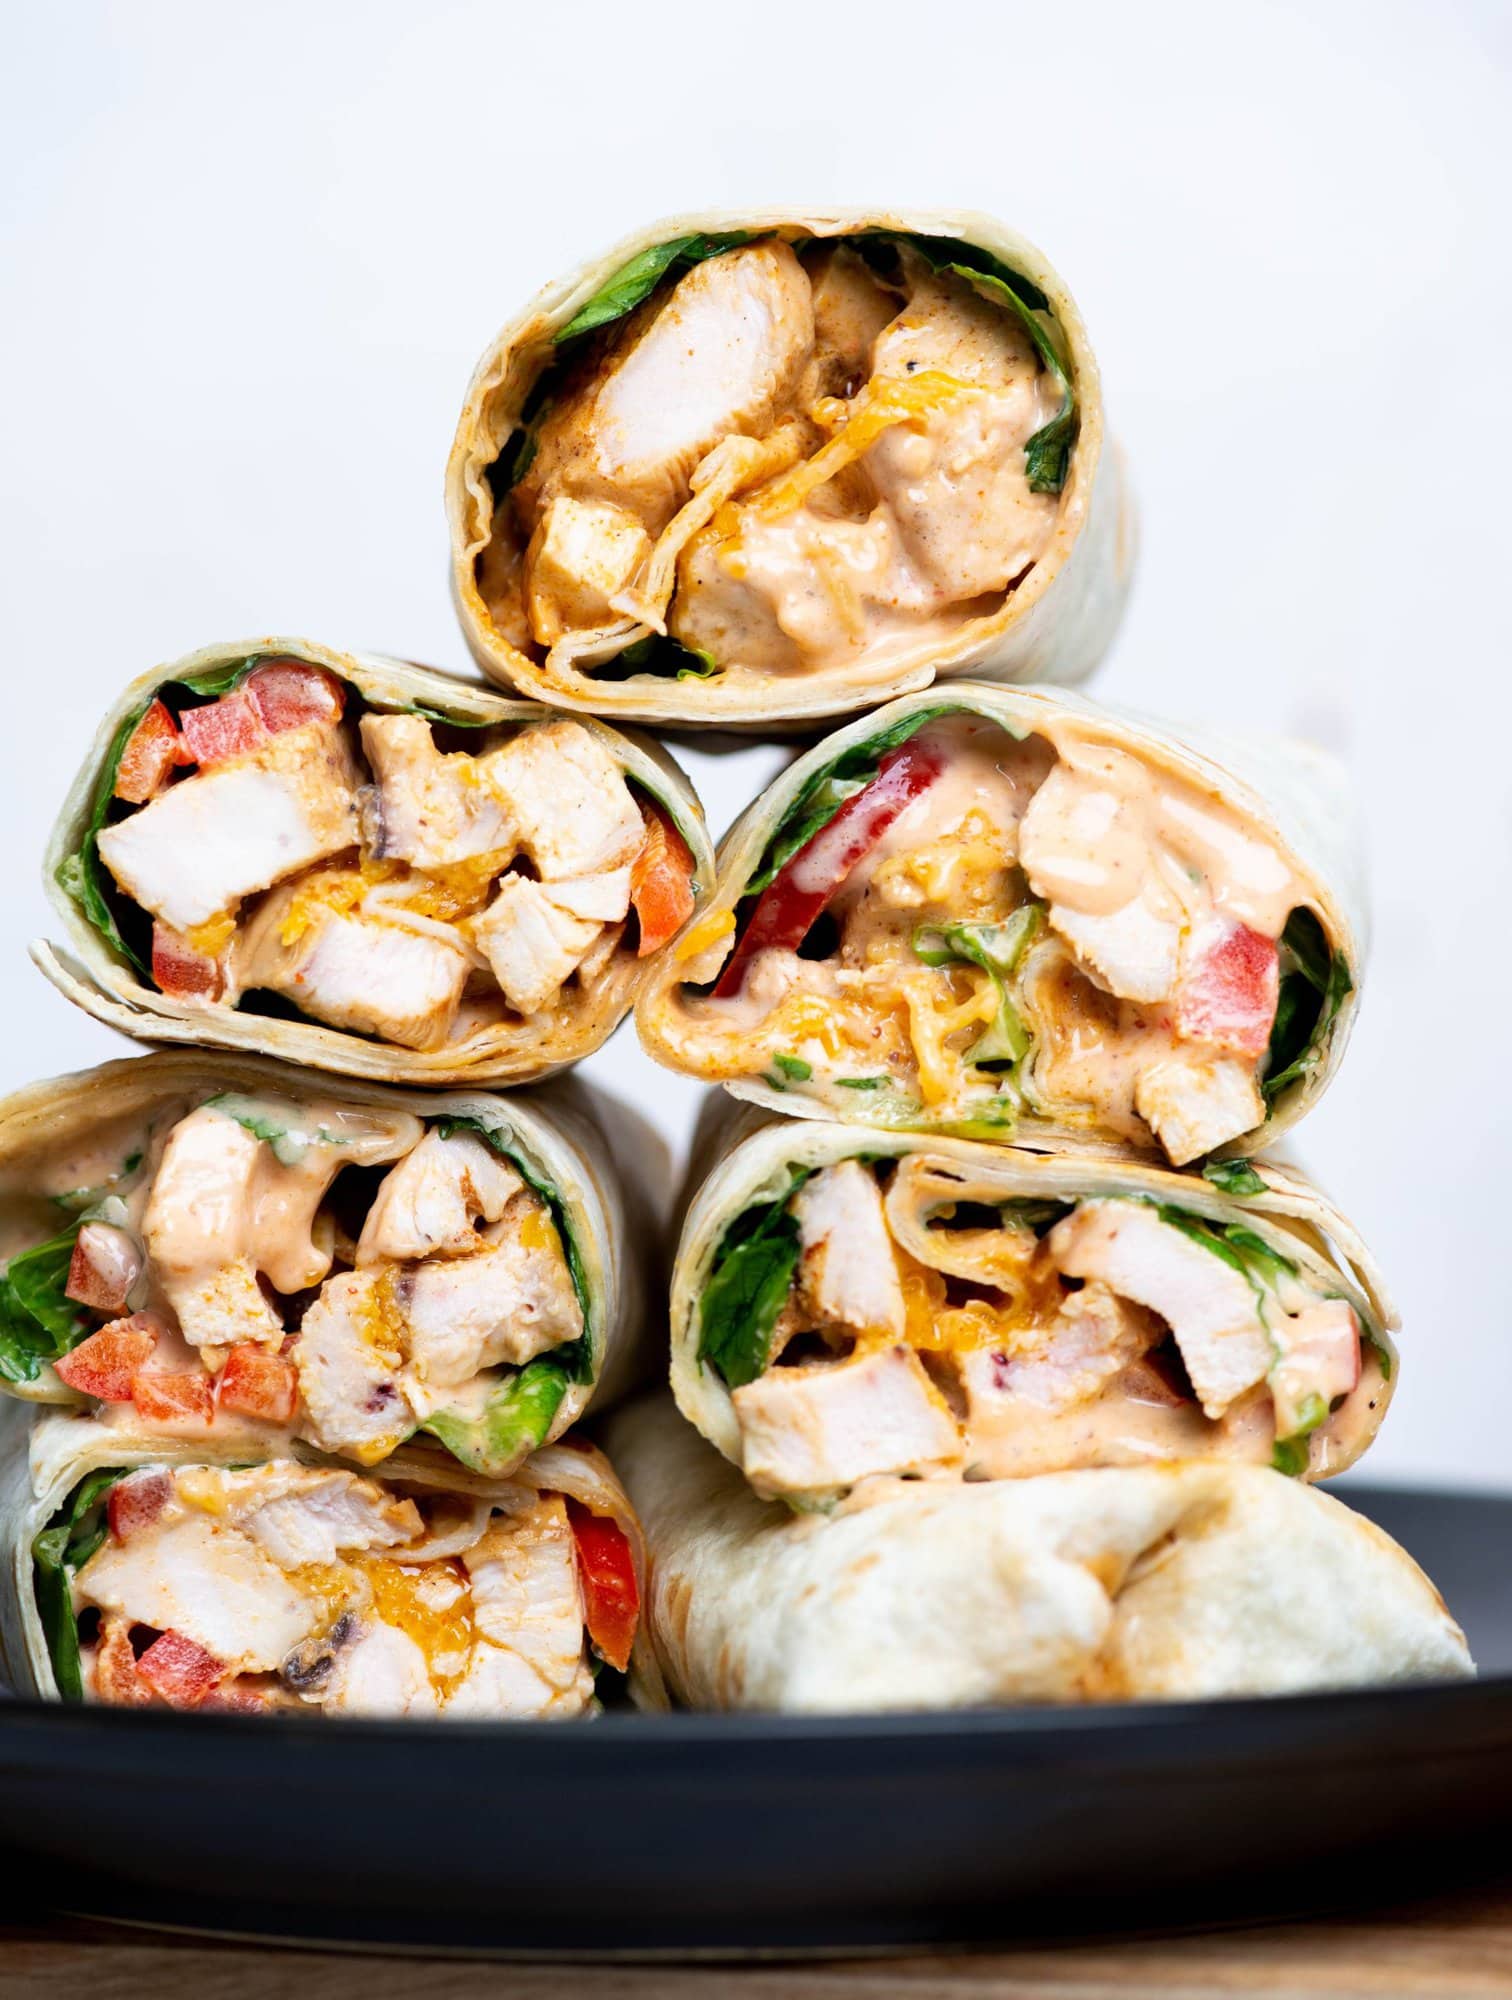 Grilled Chicken Wrap - The flavours of kitchen